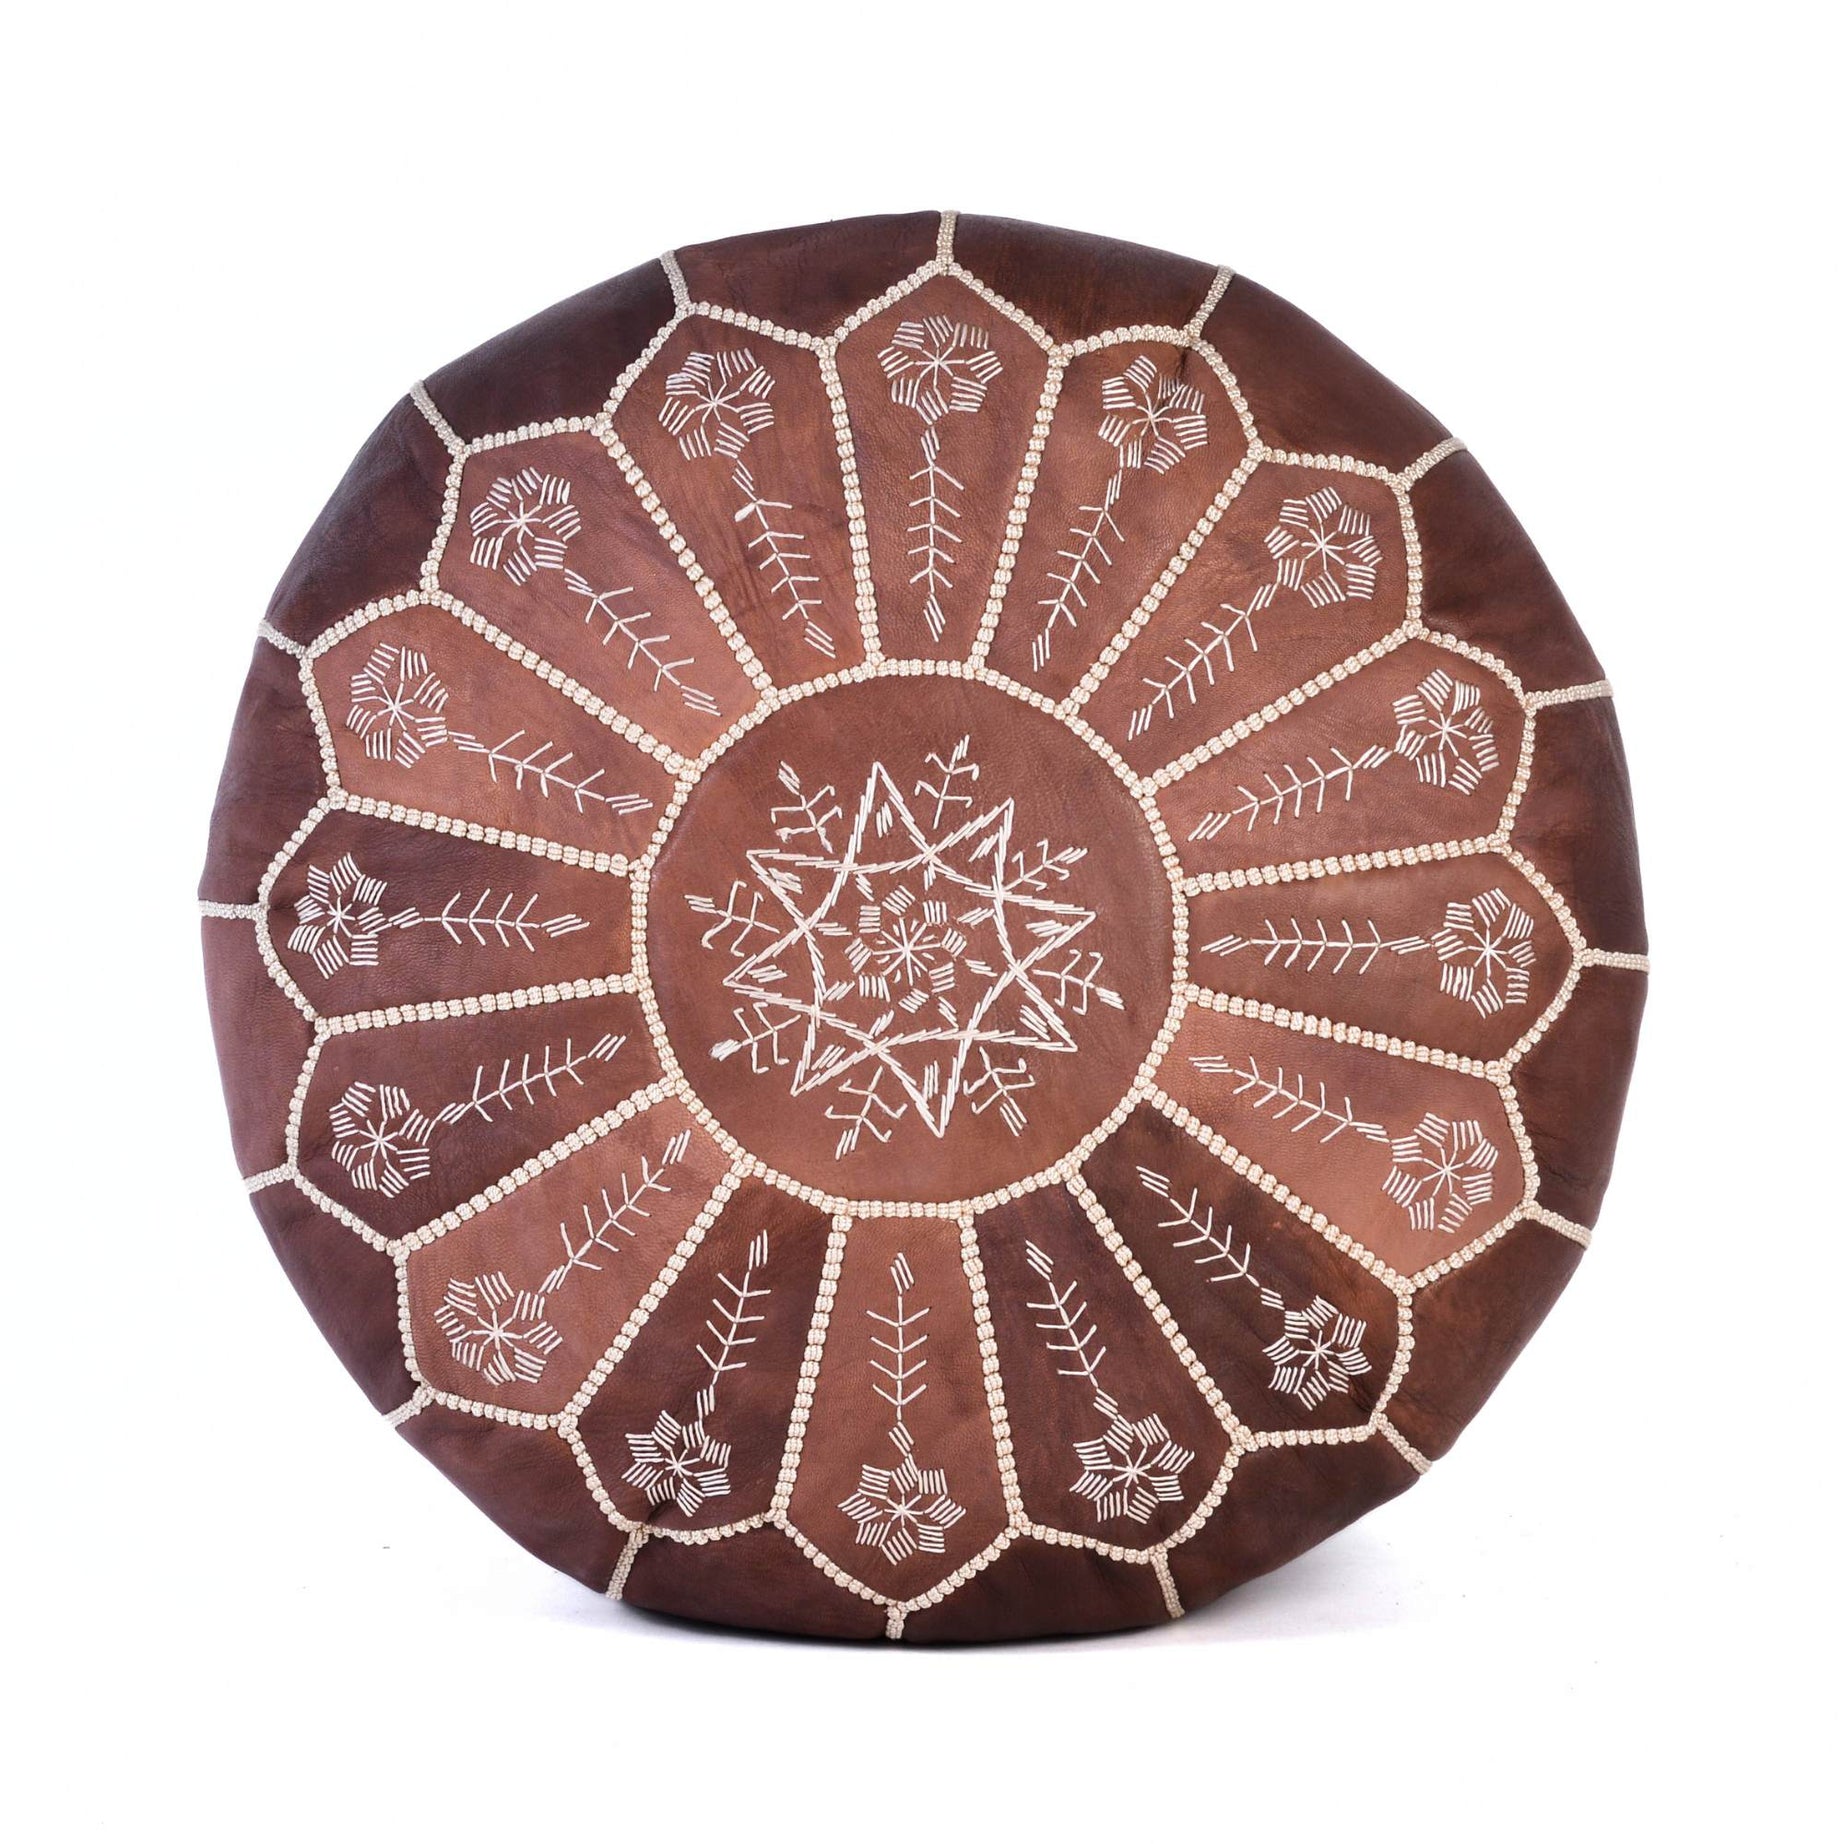 Hand-stitched Embroidery Genuine Leather Ottoman Pouf - Brown new design